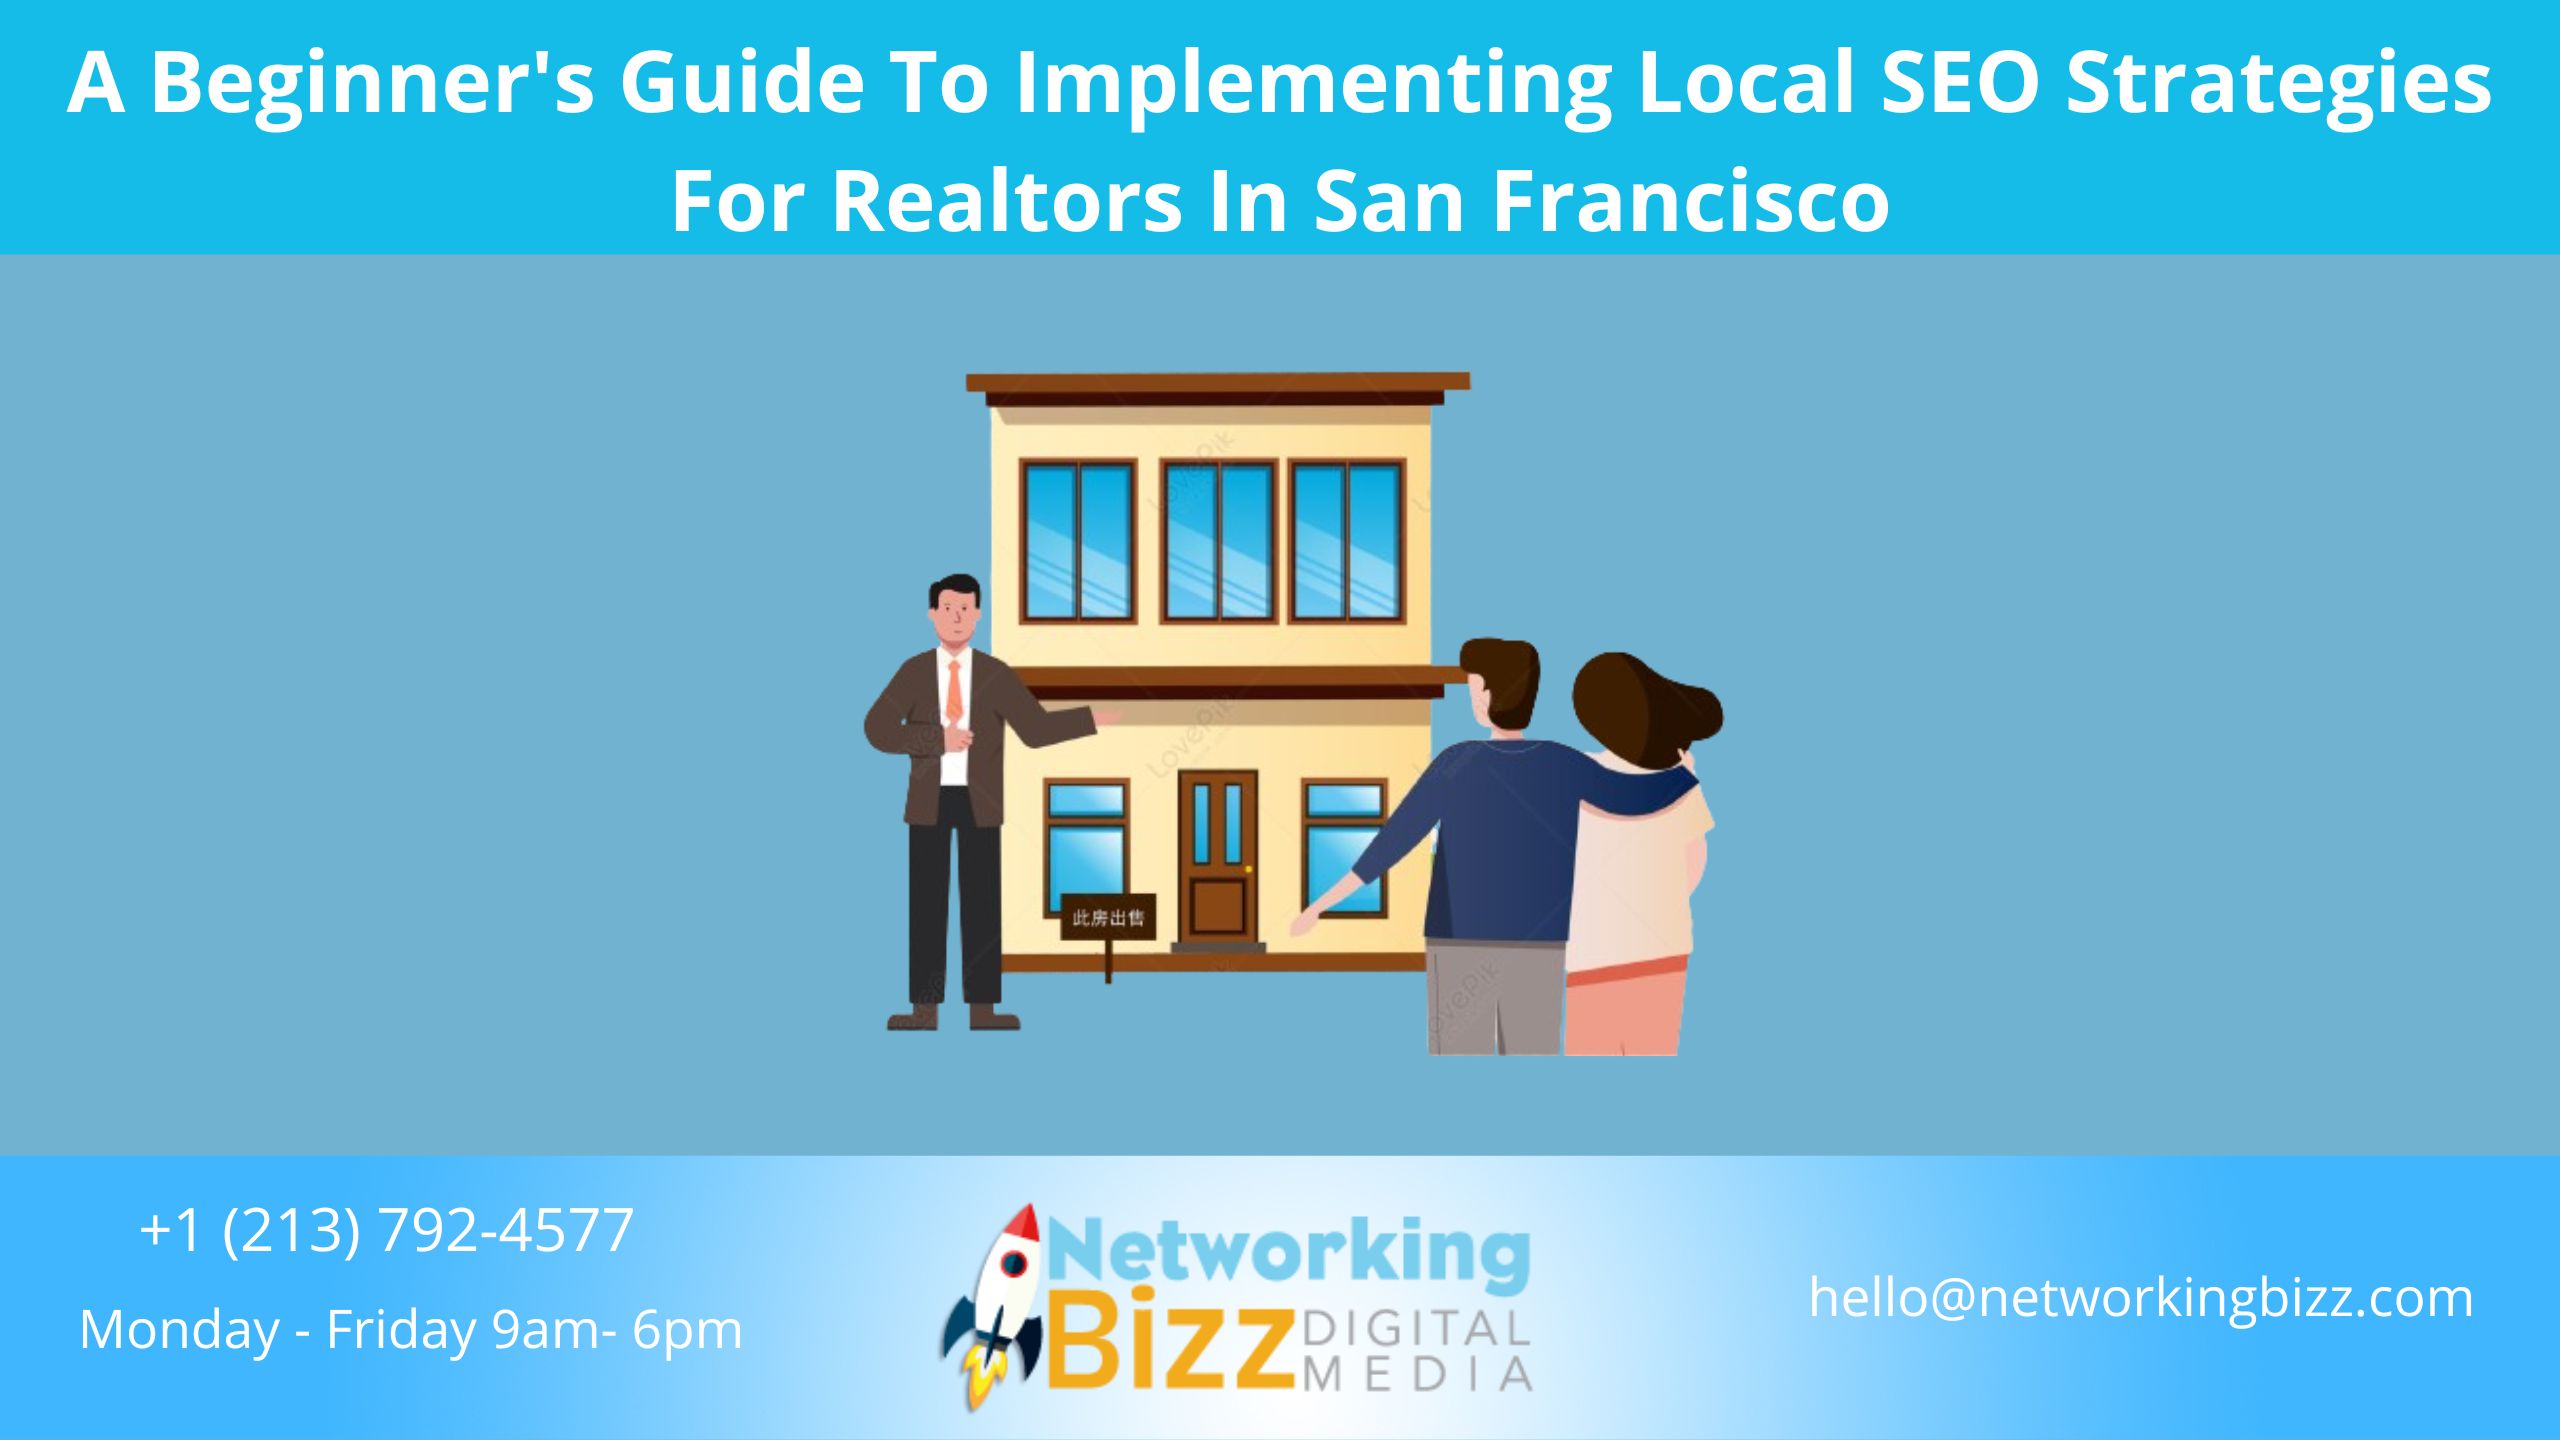 A Beginner’s Guide To Implementing Local SEO Strategies For Realtors In San Francisco